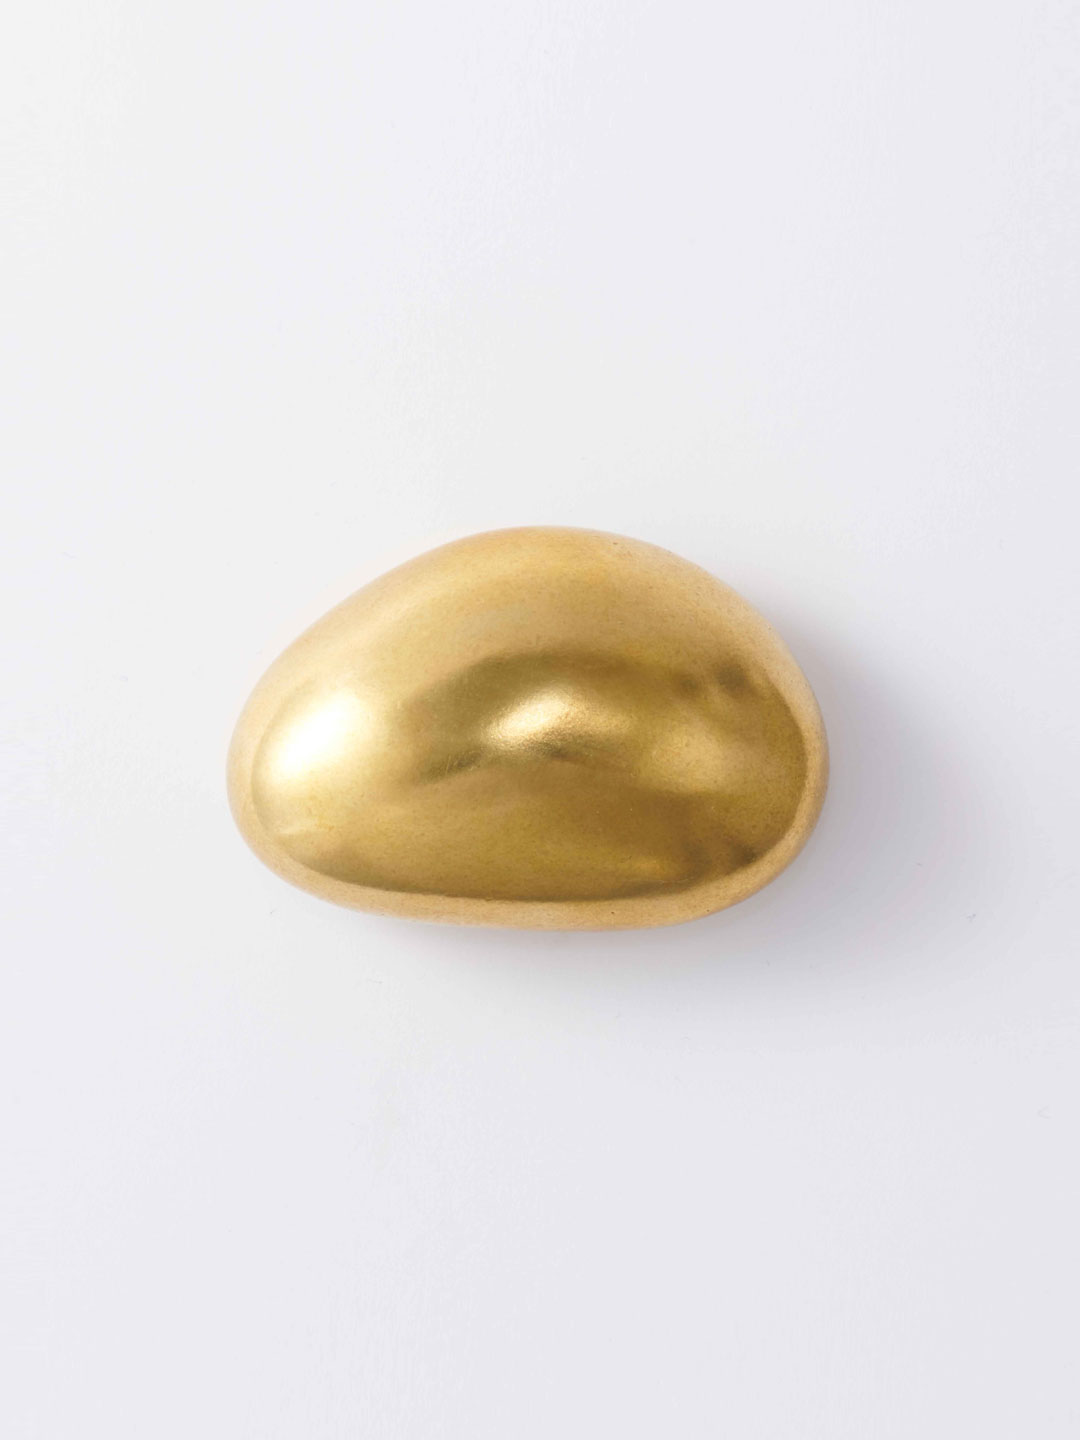 Paper Weight 004 - Gold